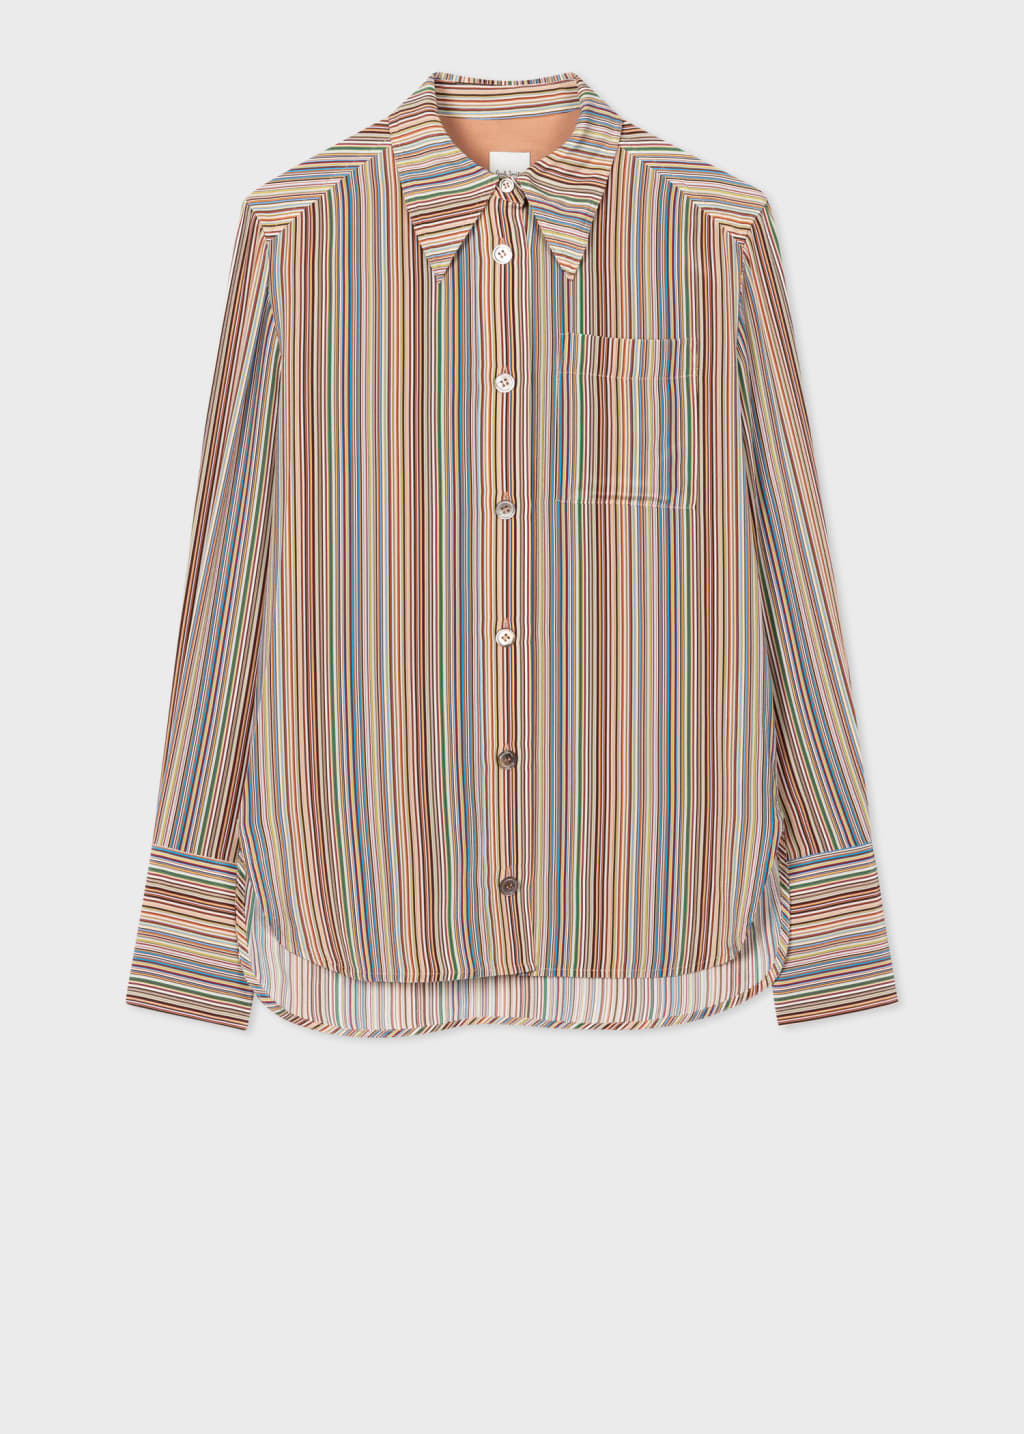 Product View - Women's Silk 'Signature Stripe' Shirt by Paul Smith